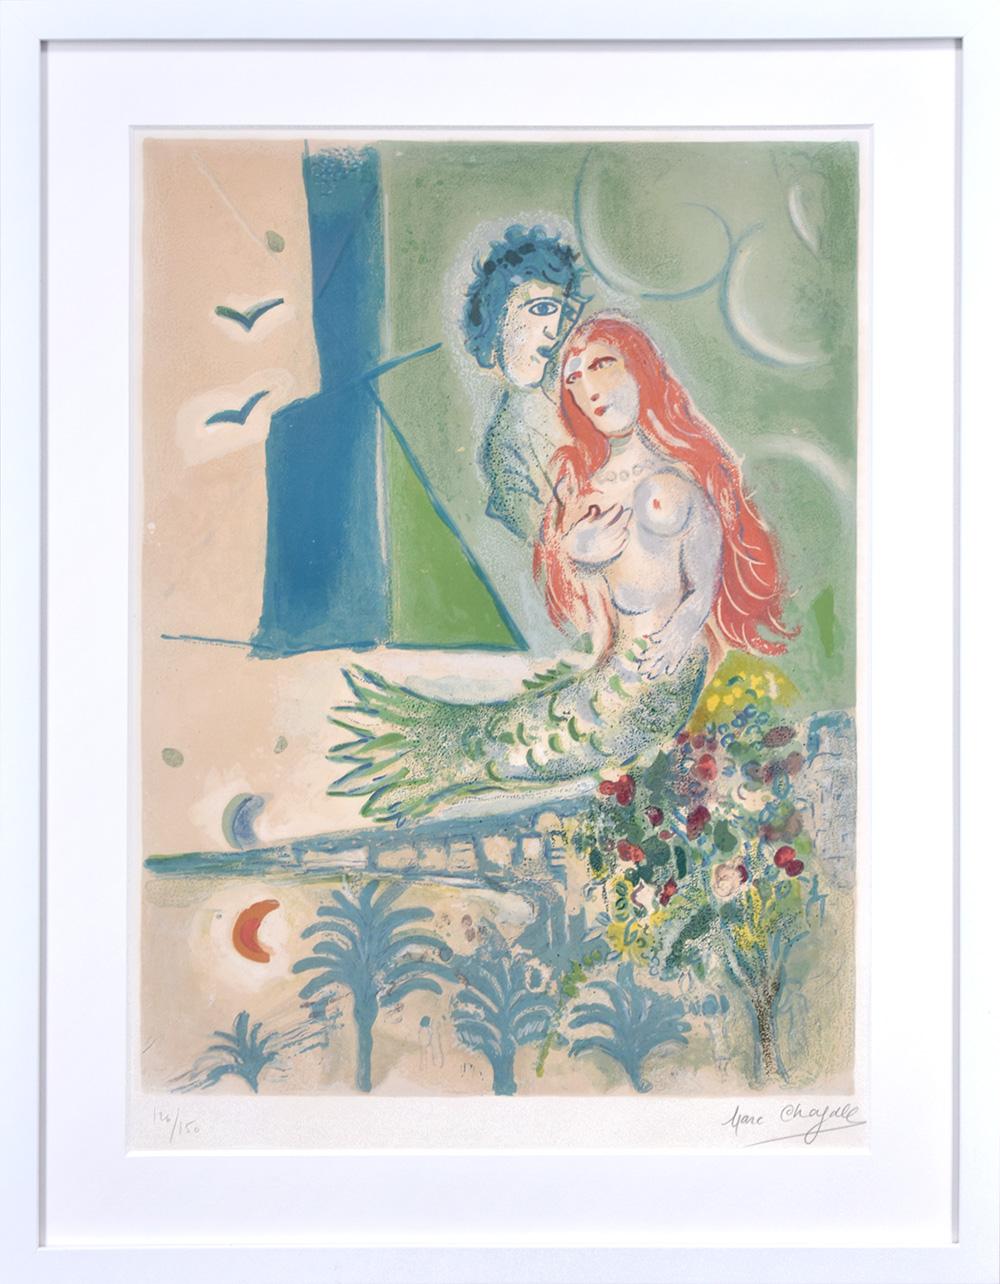 Sirène au poète (Siren with Poet), from Nice and the Côte d'Azur - Print by Marc Chagall